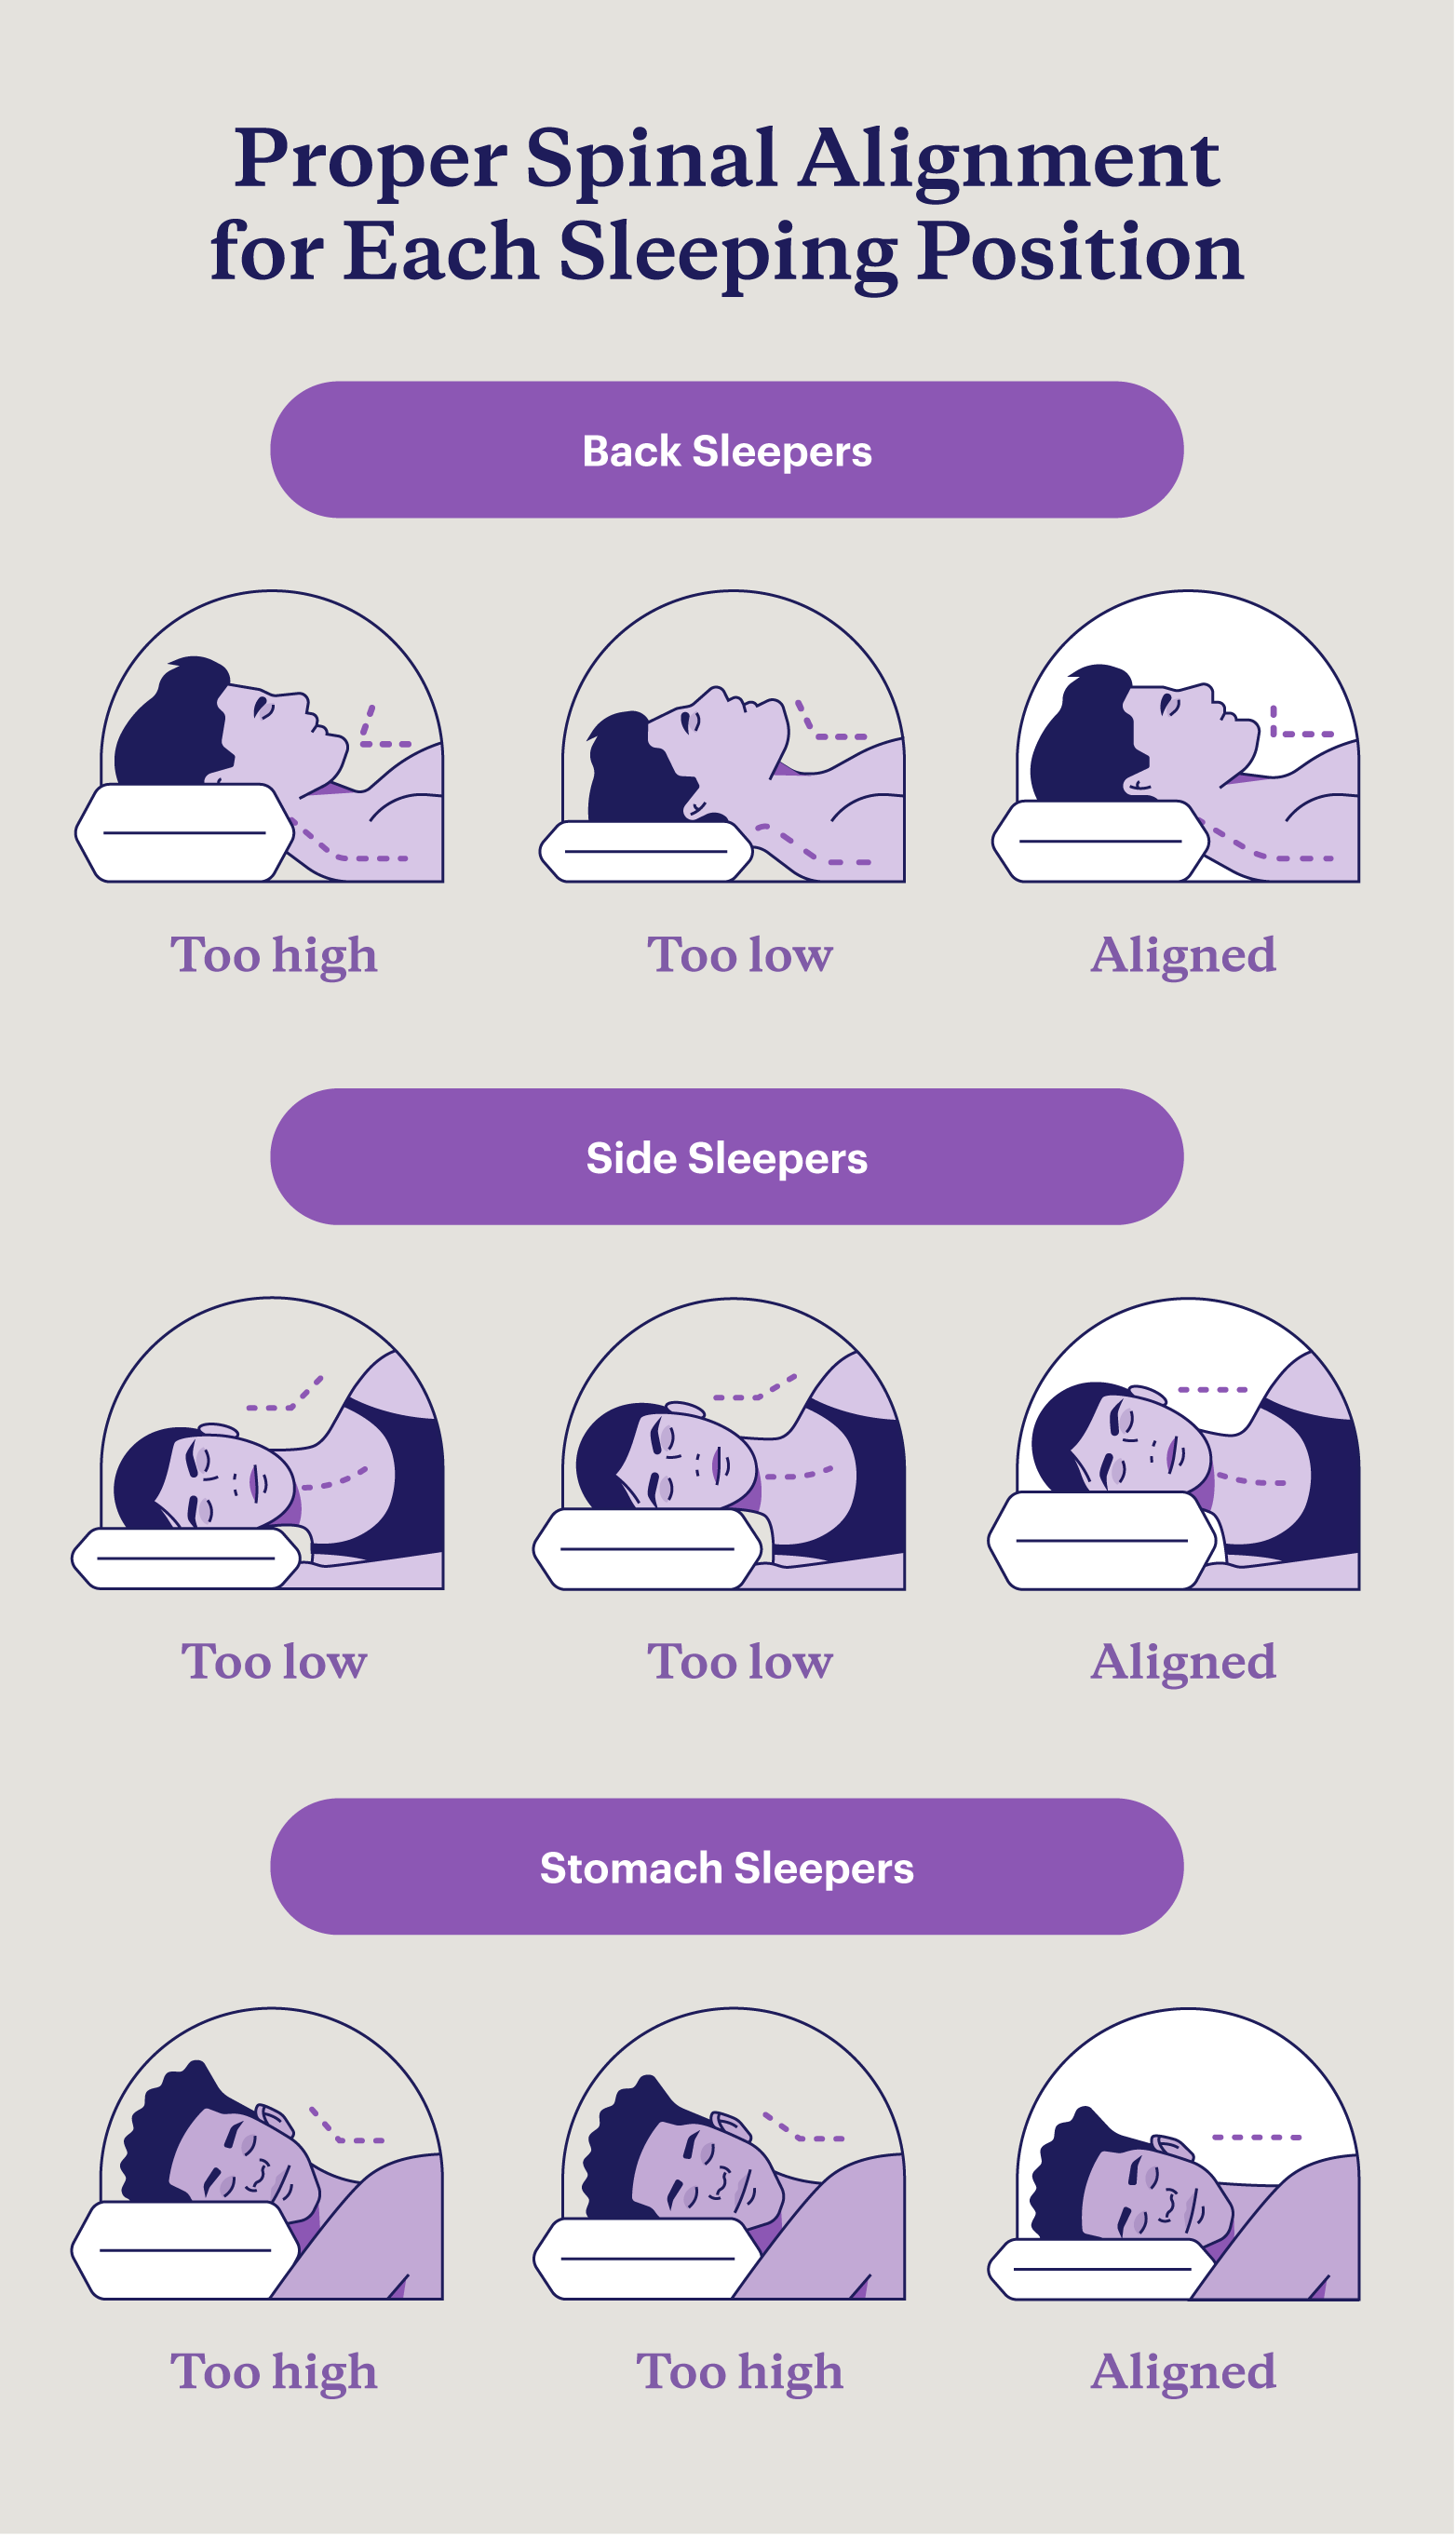 Graphic showing the proper spinal alignment and corresponding pillow loft for each sleeping position.